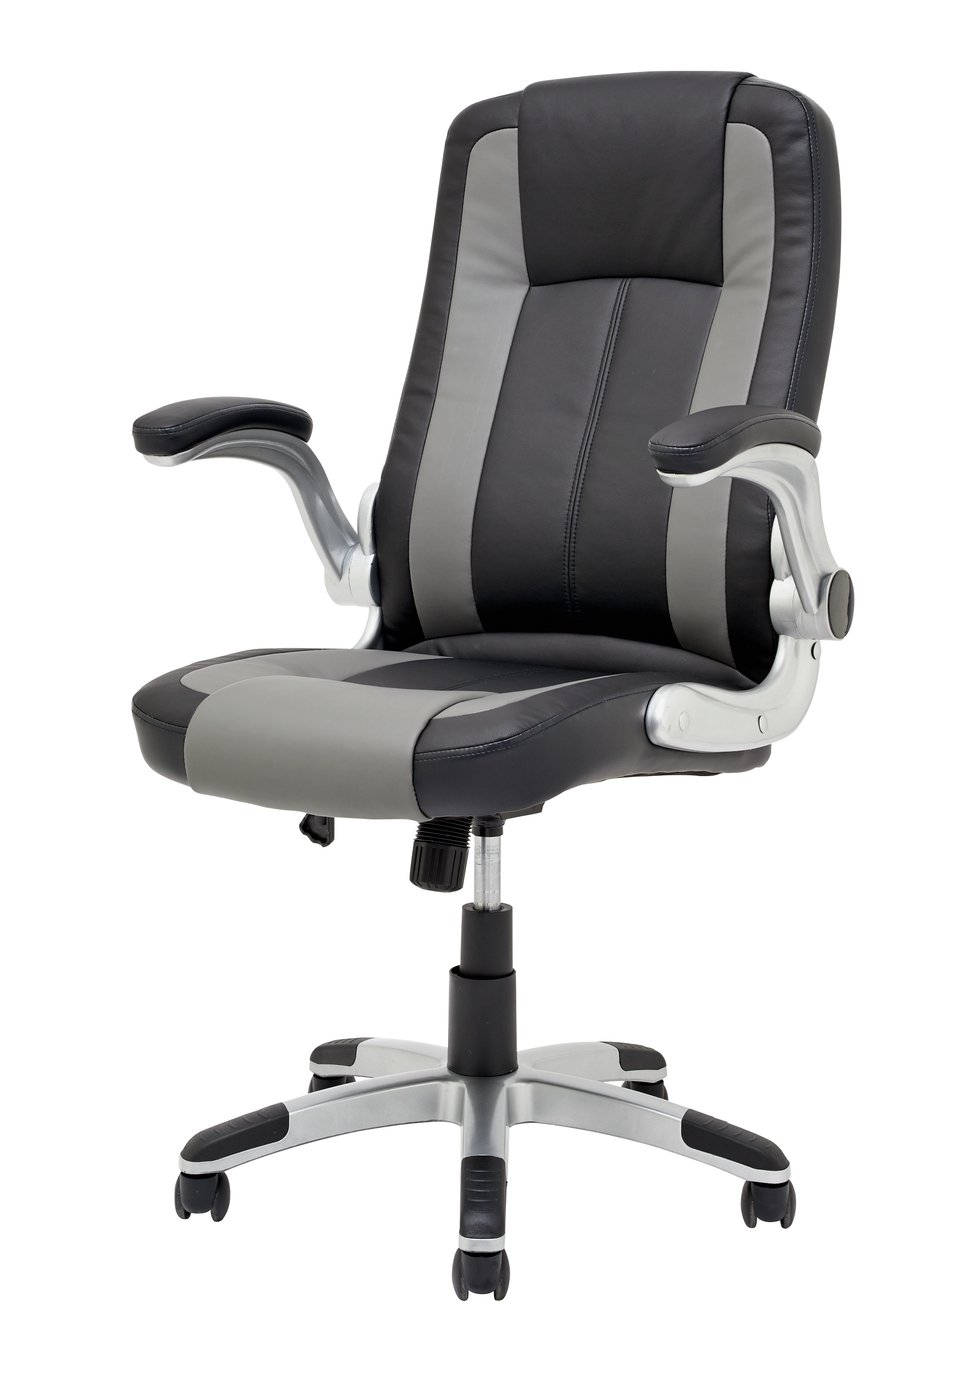 Cheap Office Chairs On Offer, Sales and Deals at Argos, Staples, Ryman